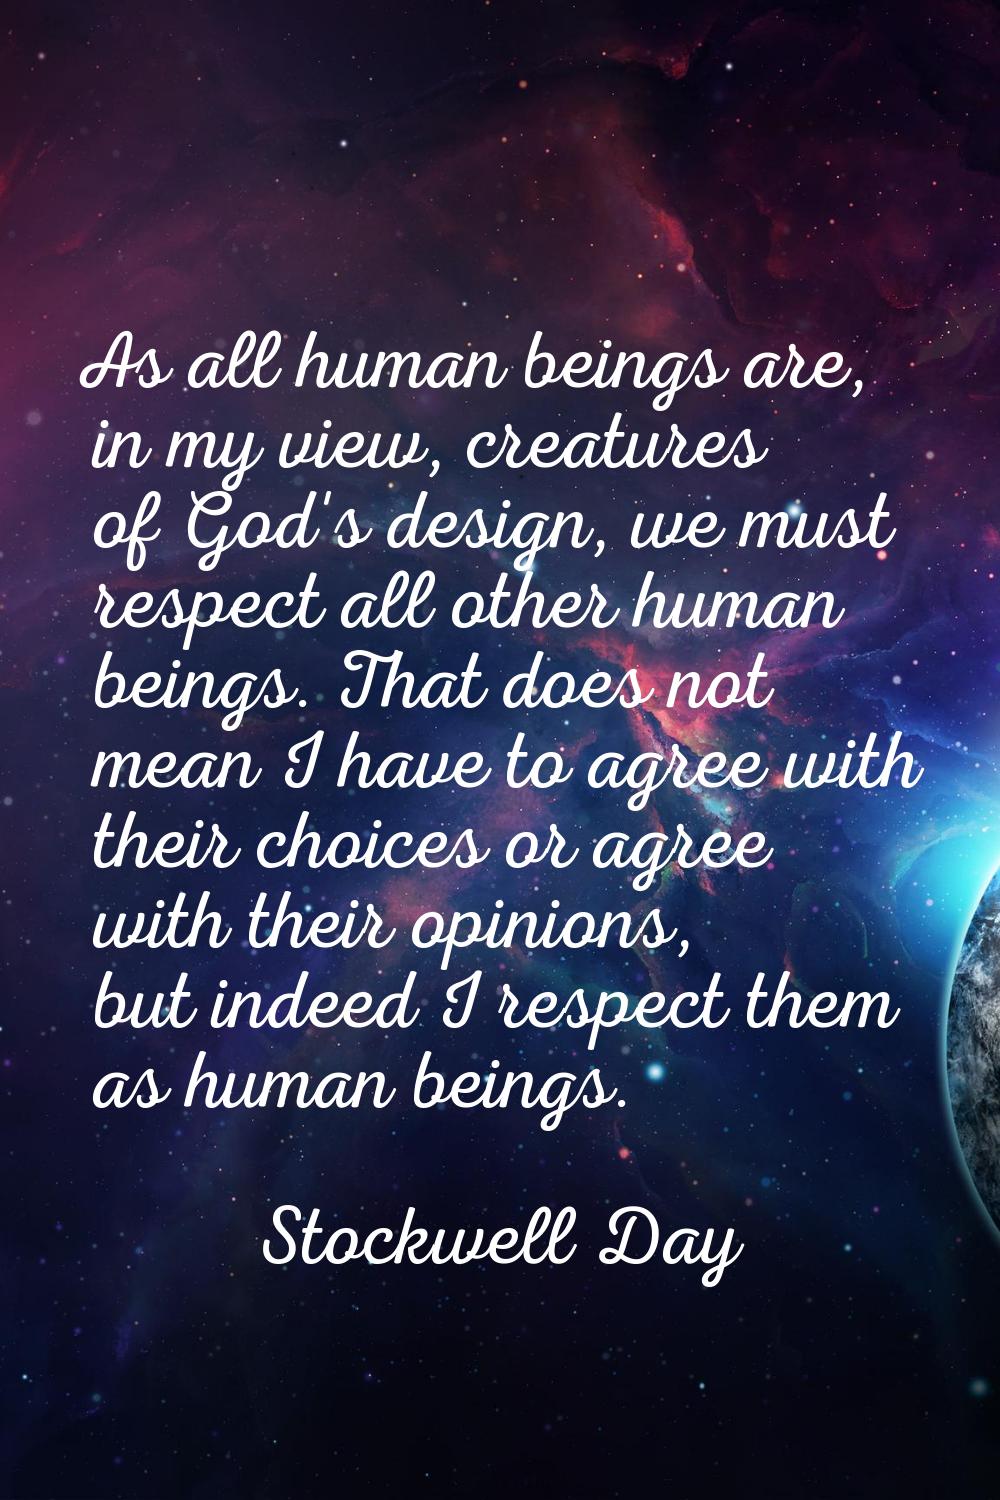 As all human beings are, in my view, creatures of God's design, we must respect all other human bei